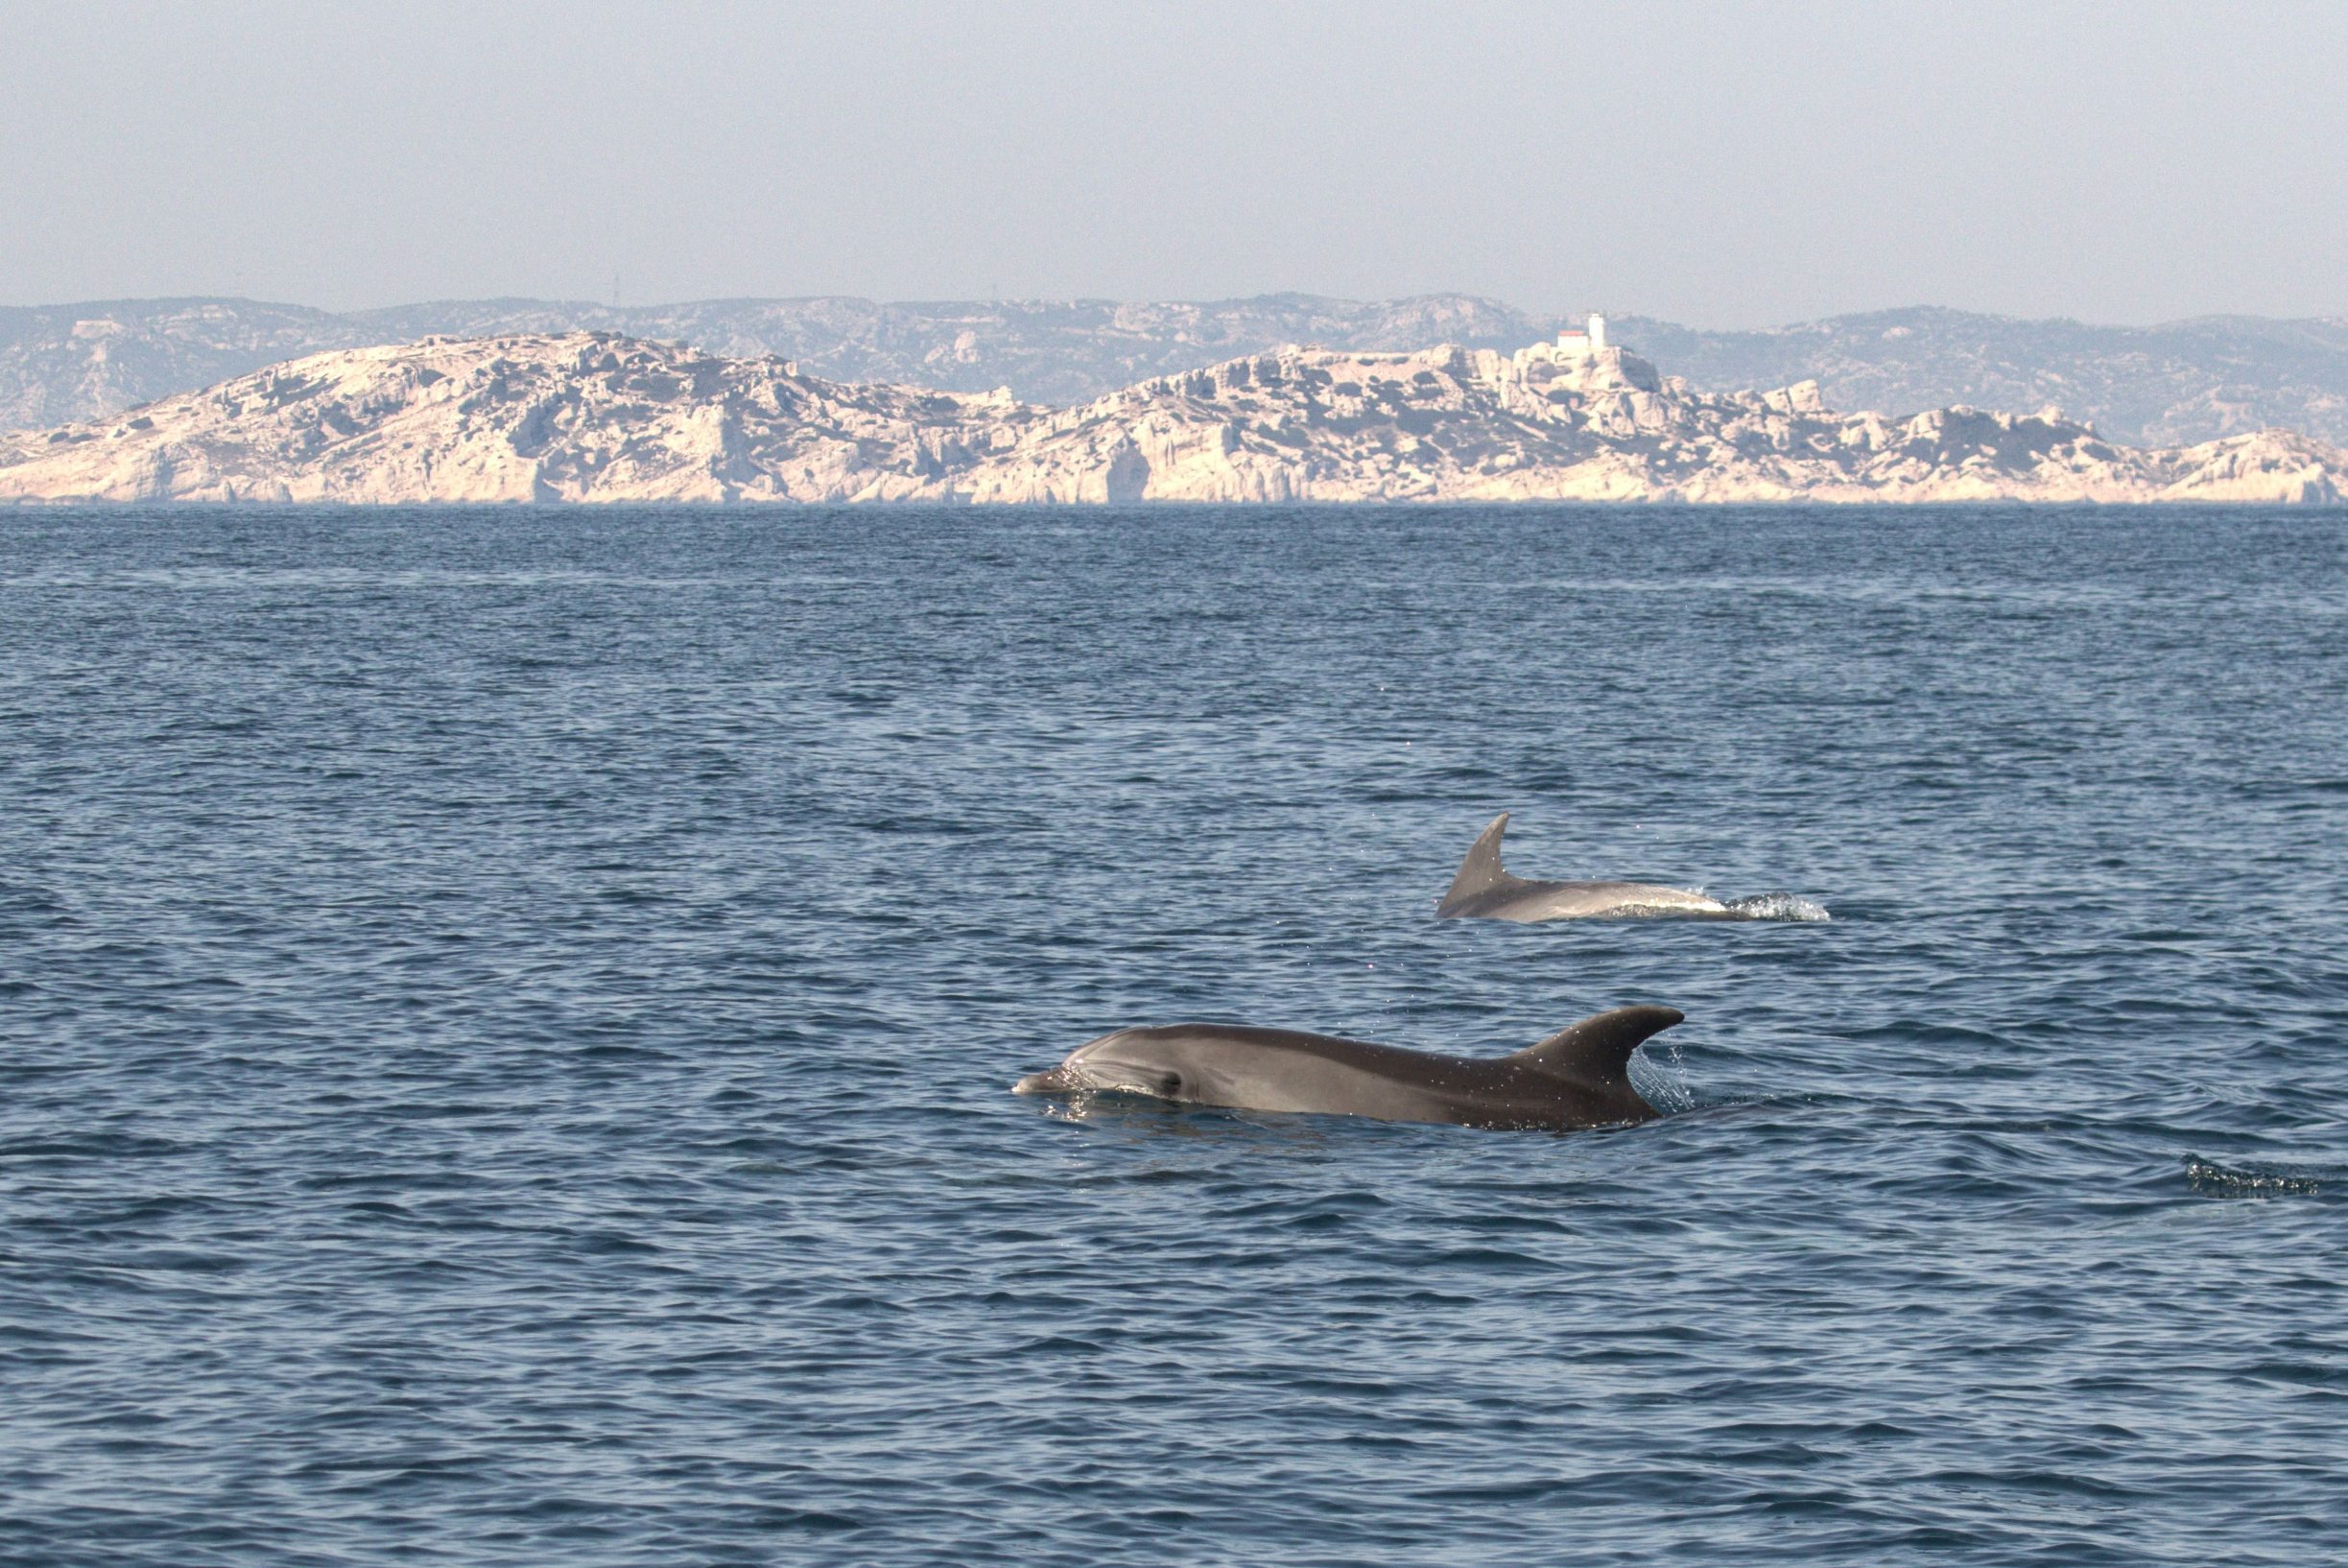 This handout picture released on March 27, 2020, by the Calanques National Park (Parc national des Calanques) shows a group of dolphins swimming in the Mediterranean Sea at the Calanques National Park, off the coast of southeastern France, on March 19, 2020, after a strict lockdown came into effect in France on March 17 aimed of stopping the spread of COVID-19 (nocel coronaivrus). - As countries around the world have progressively put into place national lockdowns to limit the spread of the new coronavirus, leading to a drop in human activity and presence outside, animals have been observed venturing further into areas with usually a human presence. (Photo by Lionel LASO / Parc national des Calanques / AFP) / RESTRICTED TO EDITORIAL USE - MANDATORY CREDIT 